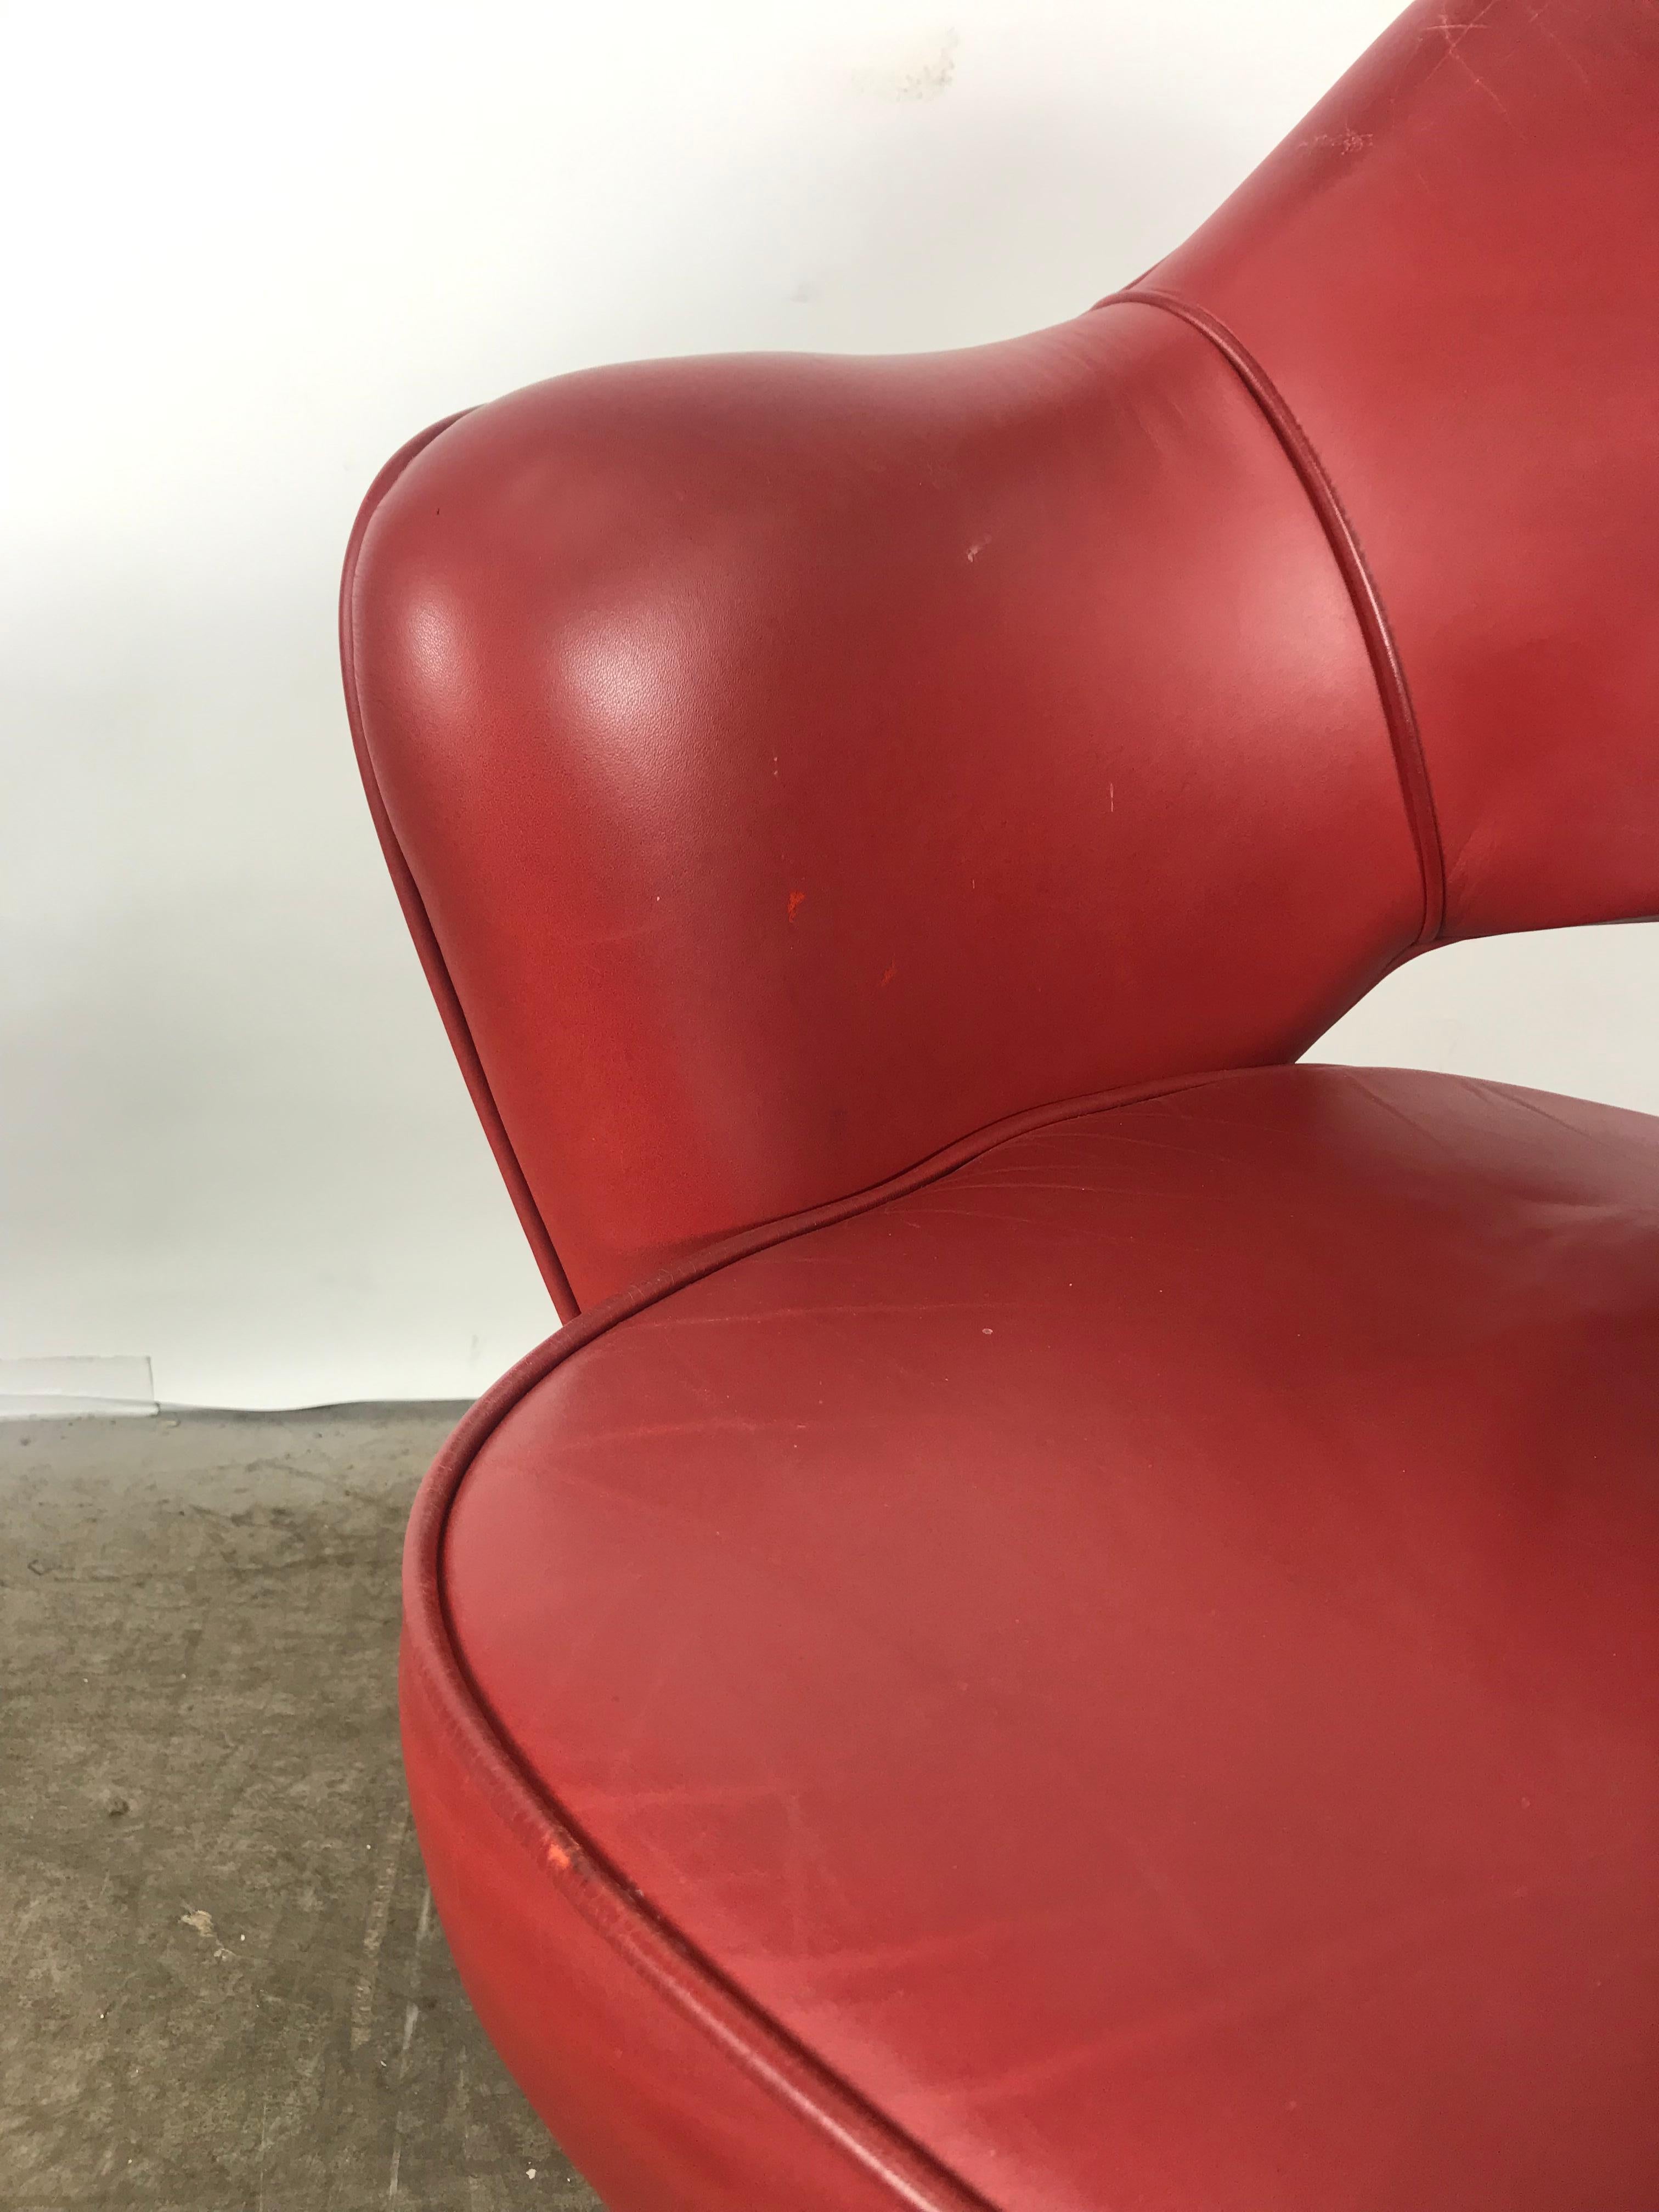 Classic leather Knoll executive swivel rolling armchair, Eero Saarinen. Nice original oxblood red leather, age appropriate wear, some crazing, patina, retains original Knoll label.